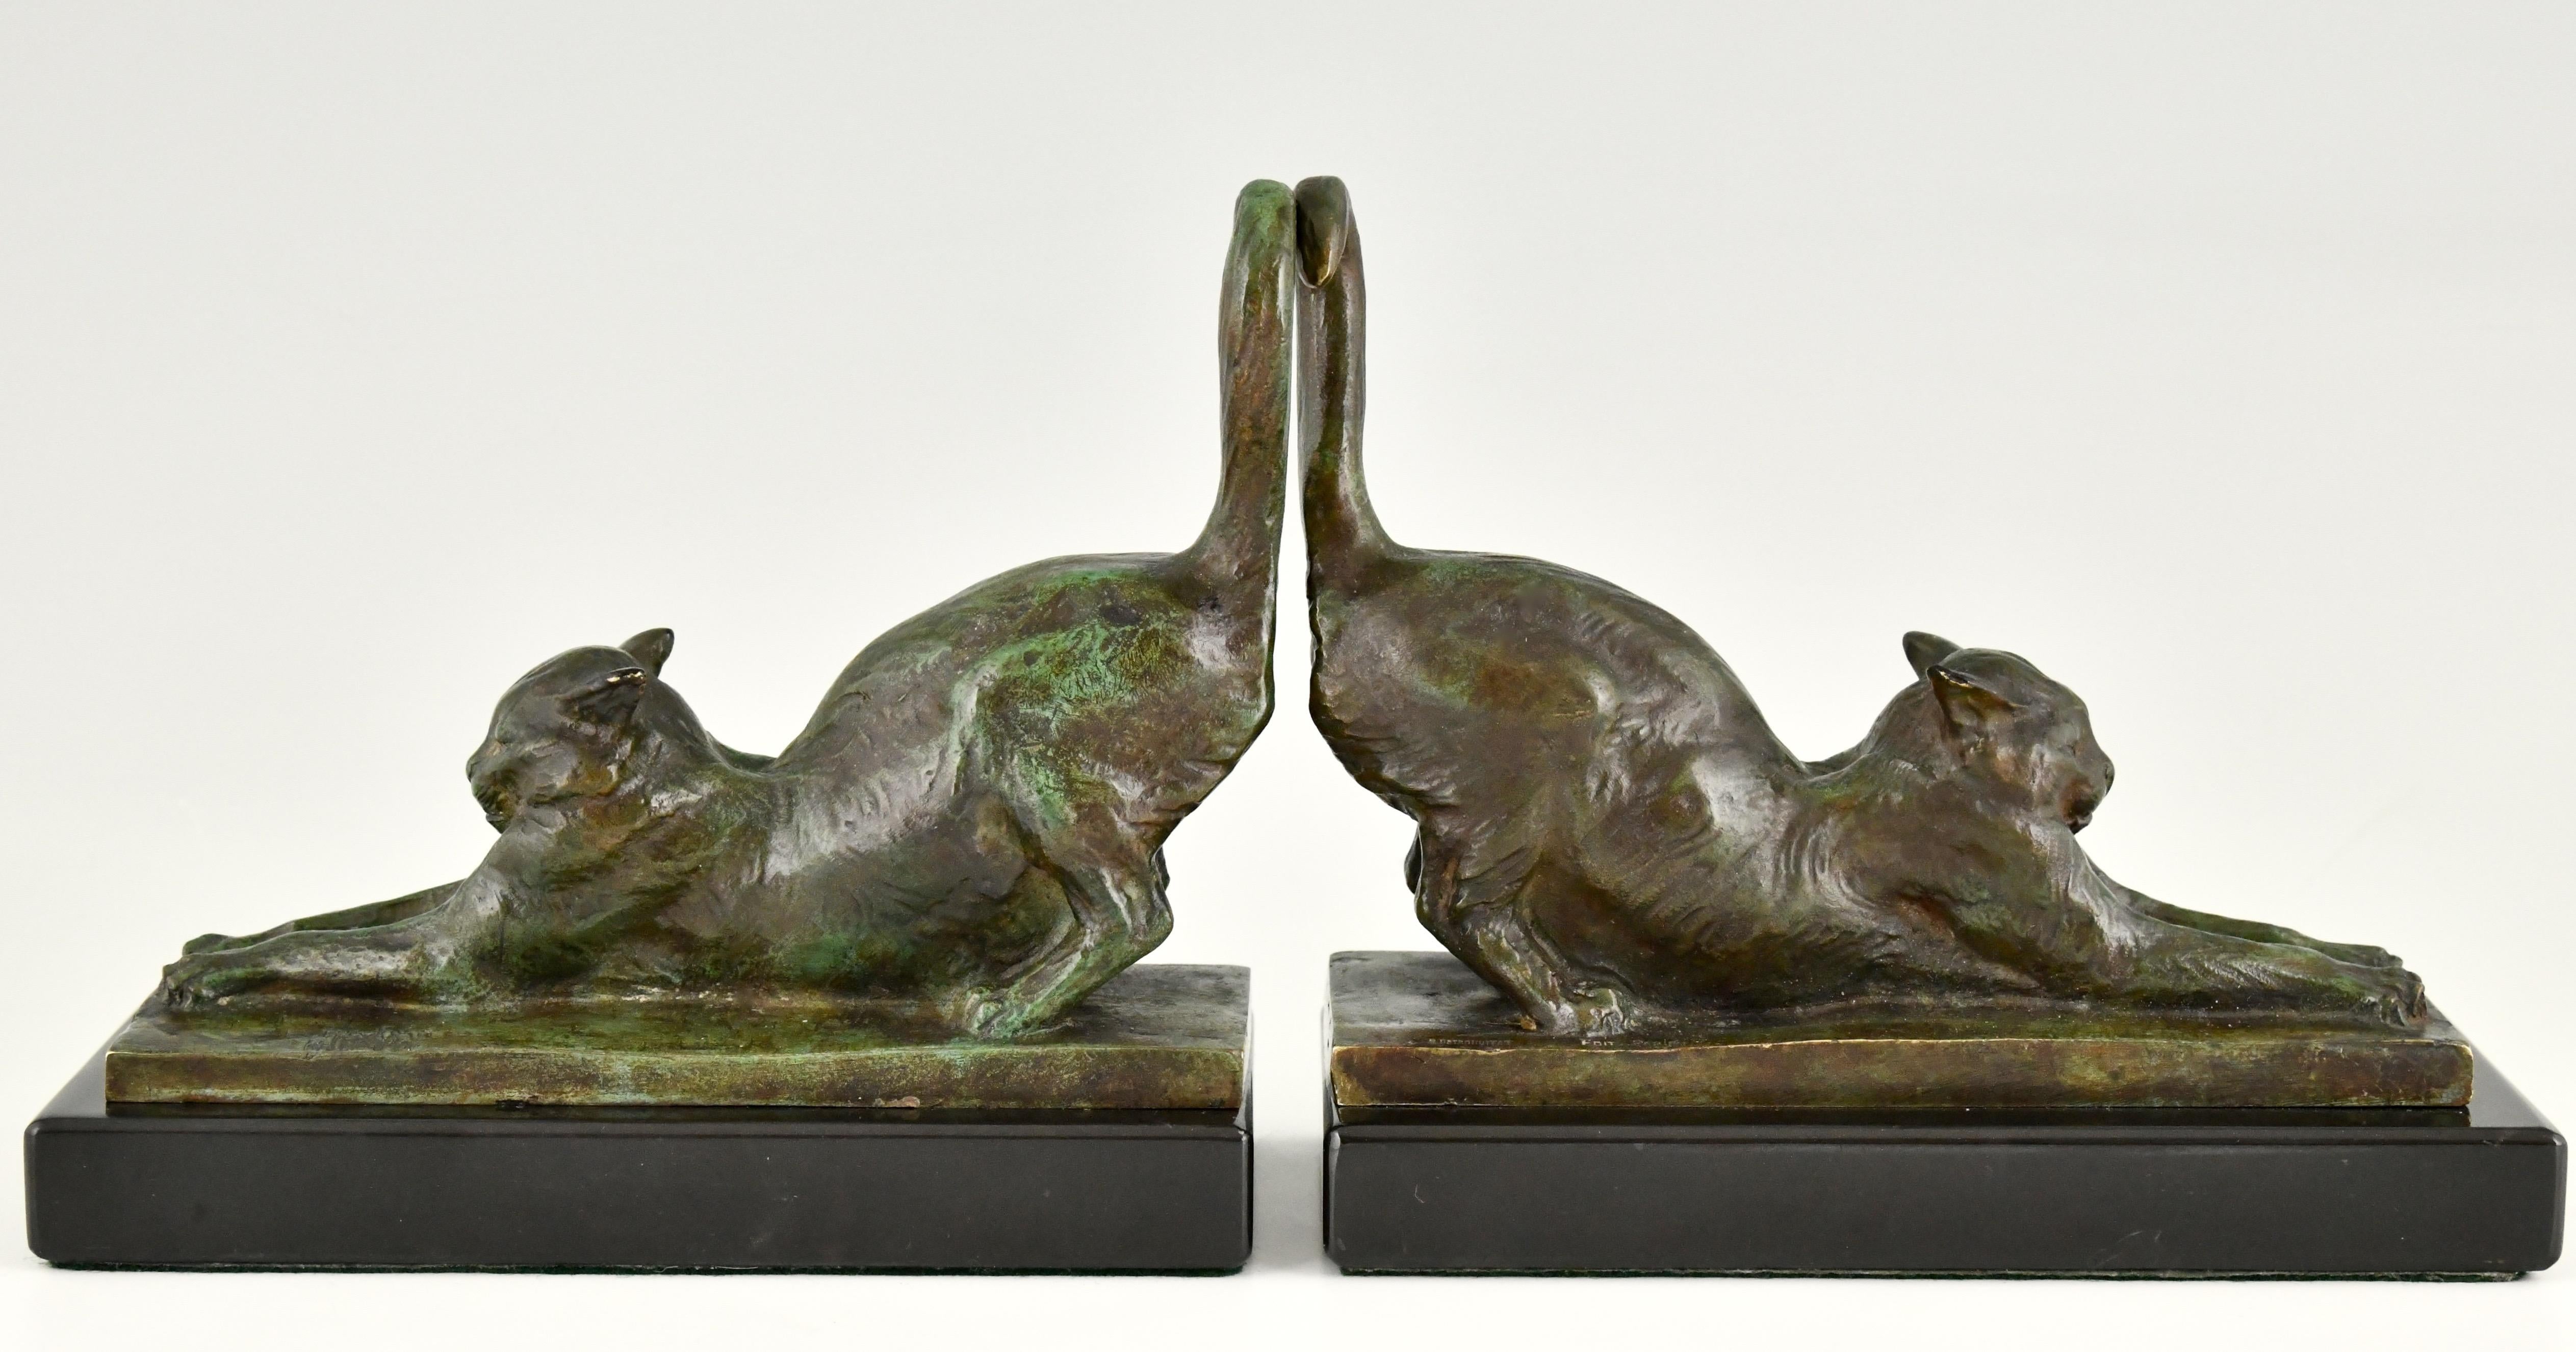 Very beautiful pair of Art Deco bronze bookends with stretching cats on a black marble base. The pair is signed by Louis Riche (1877-1949), a famous French animalier who specialized in cat sculptures.
Signed and marked Medaille d'Or.
Ca.